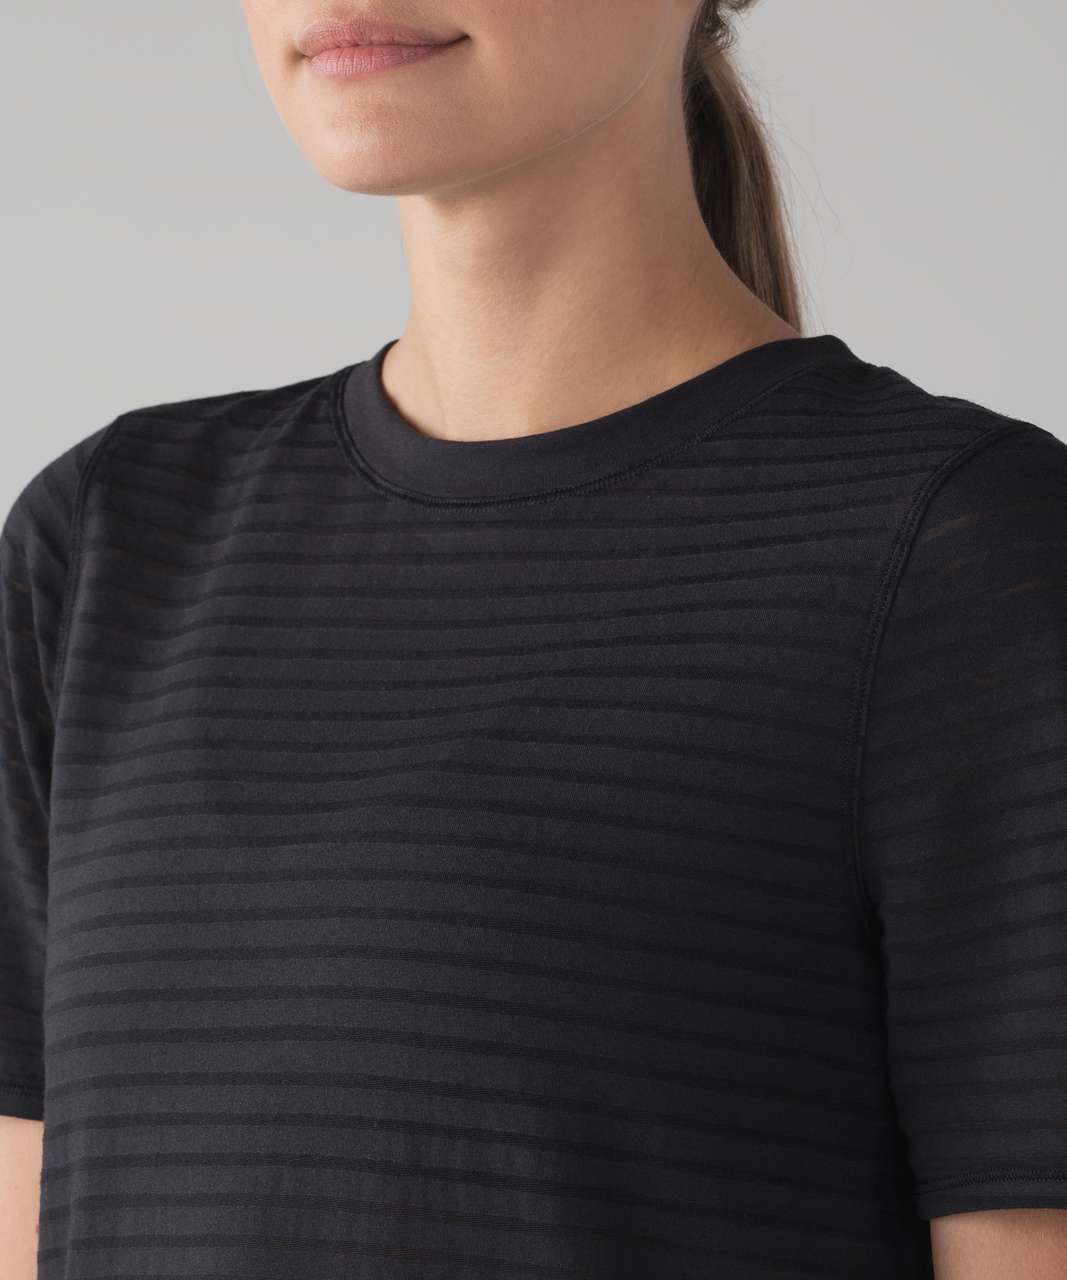 Lululemon Uncovered Tall Tee - Black (First Release)